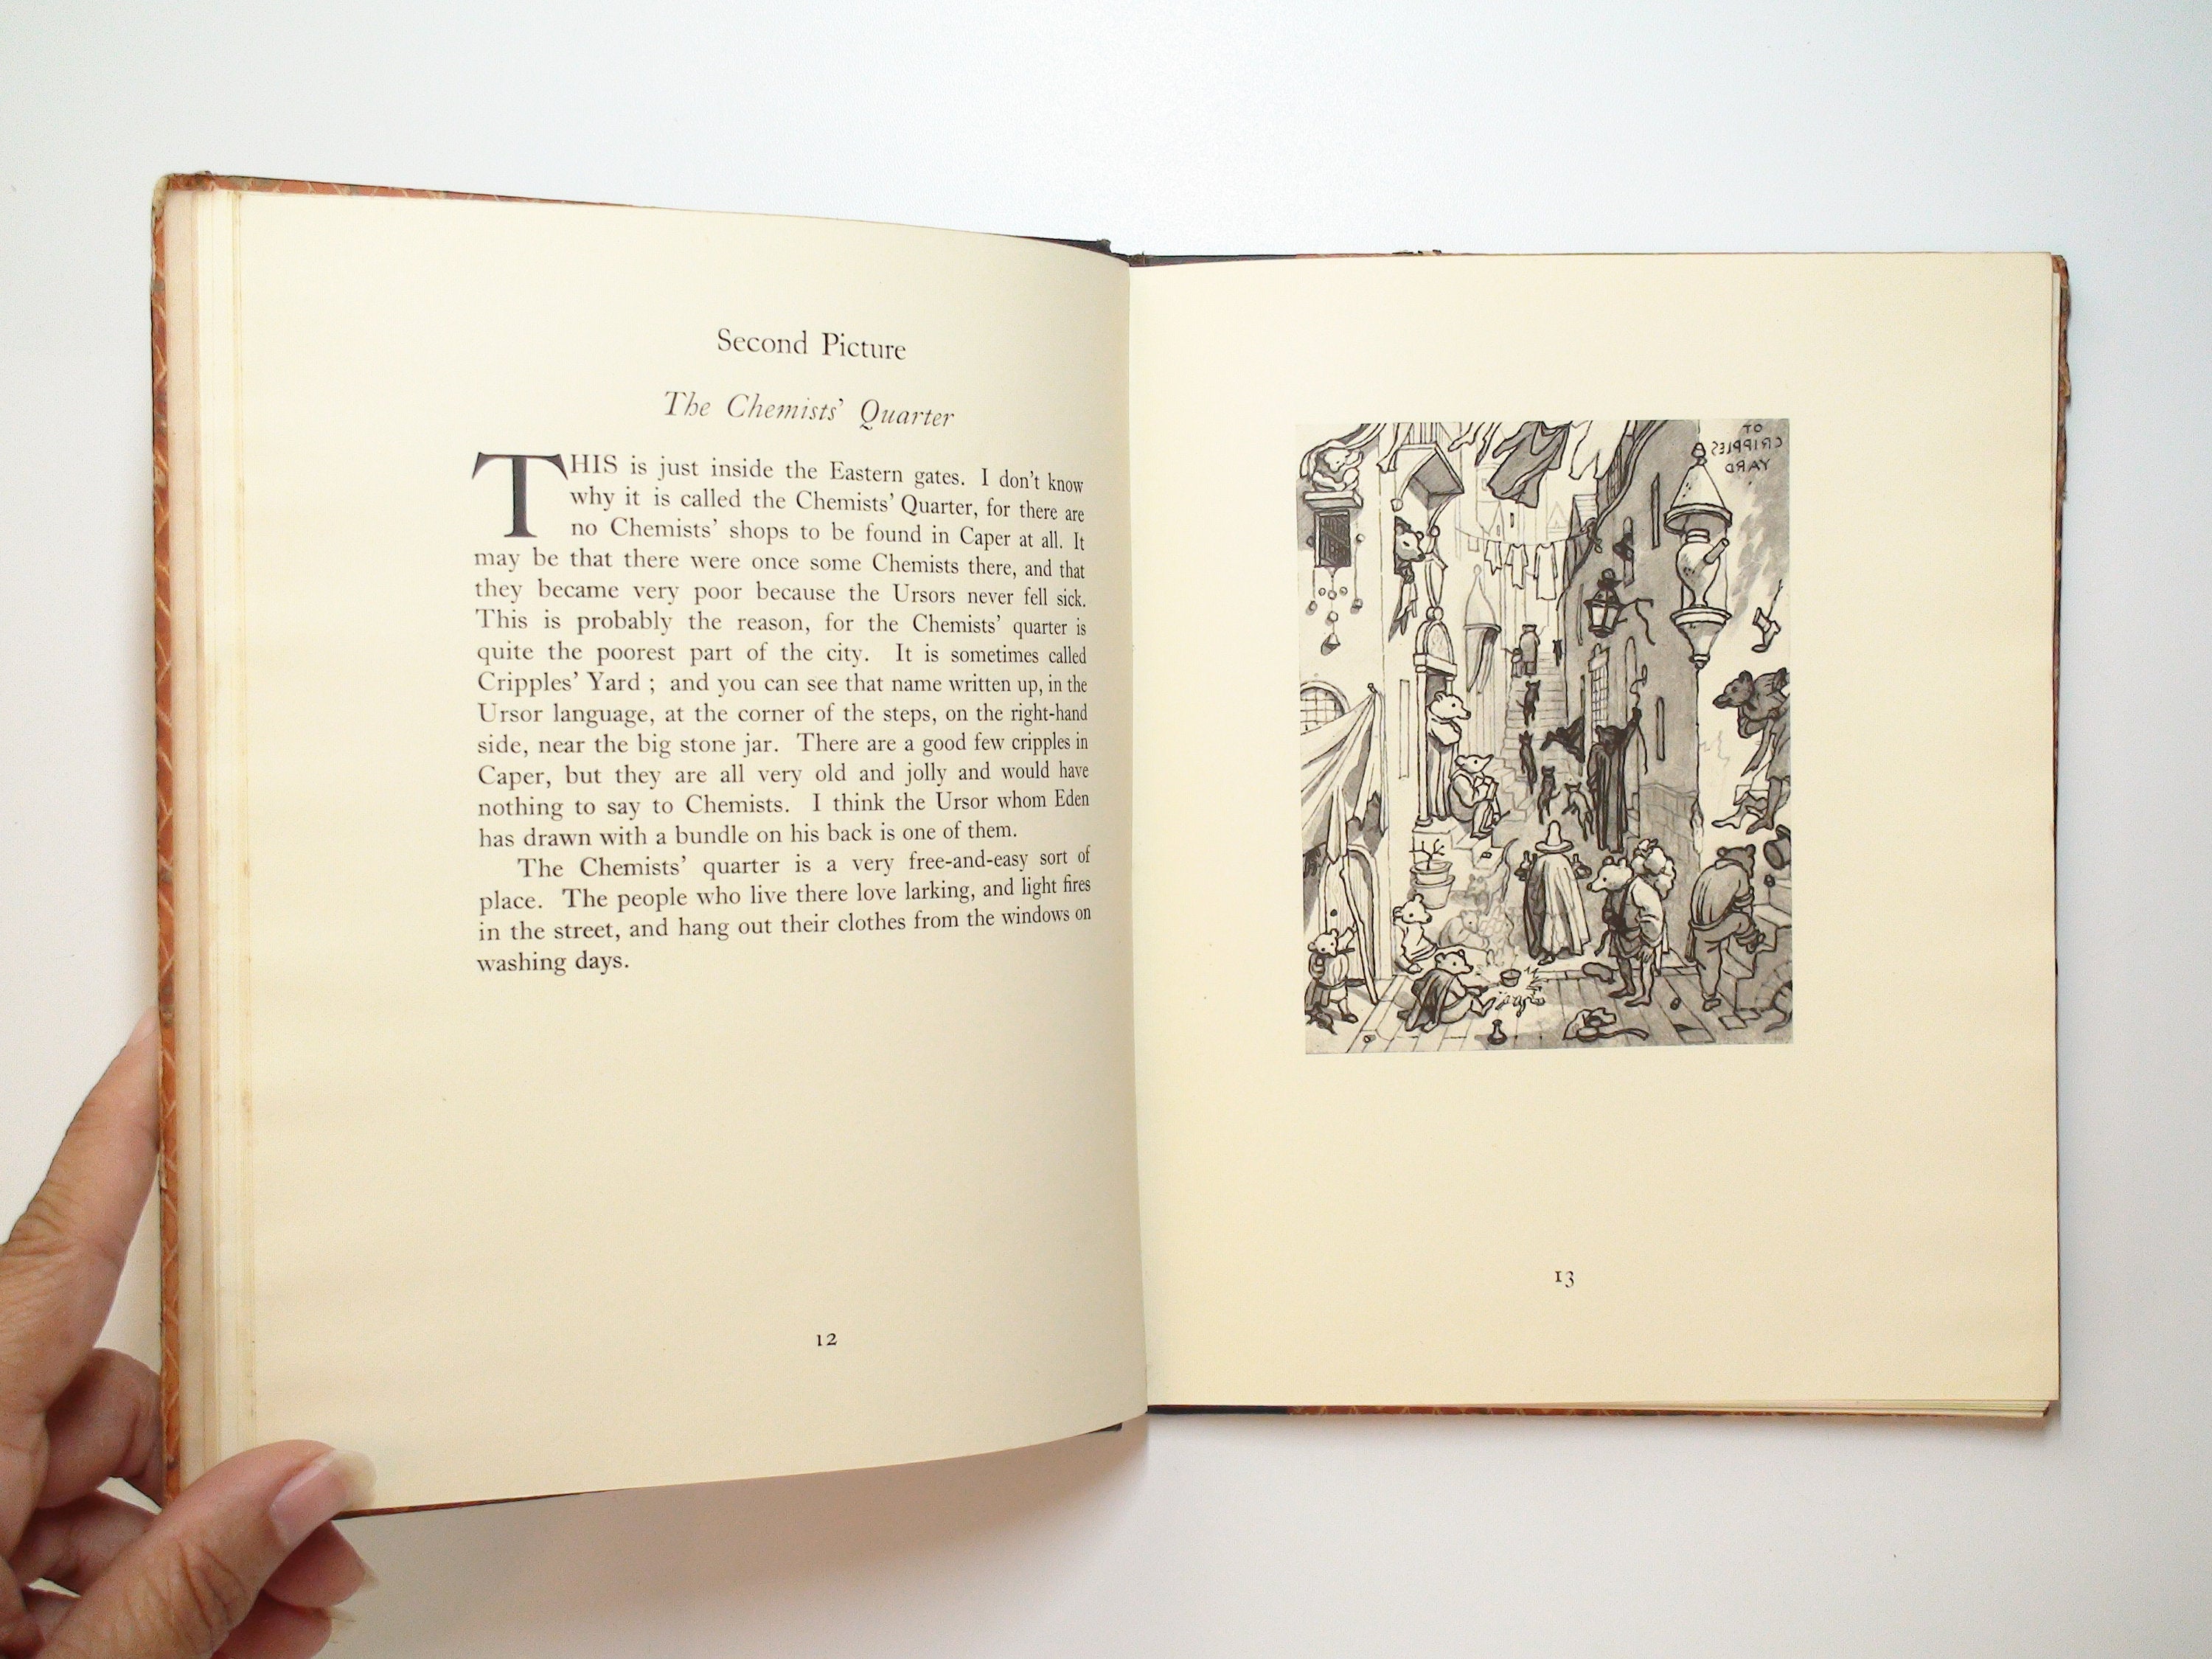 A Guide to Caper, by Thomas Bodkin, Illustrated by Denis Eden, 1st Ed, 1924